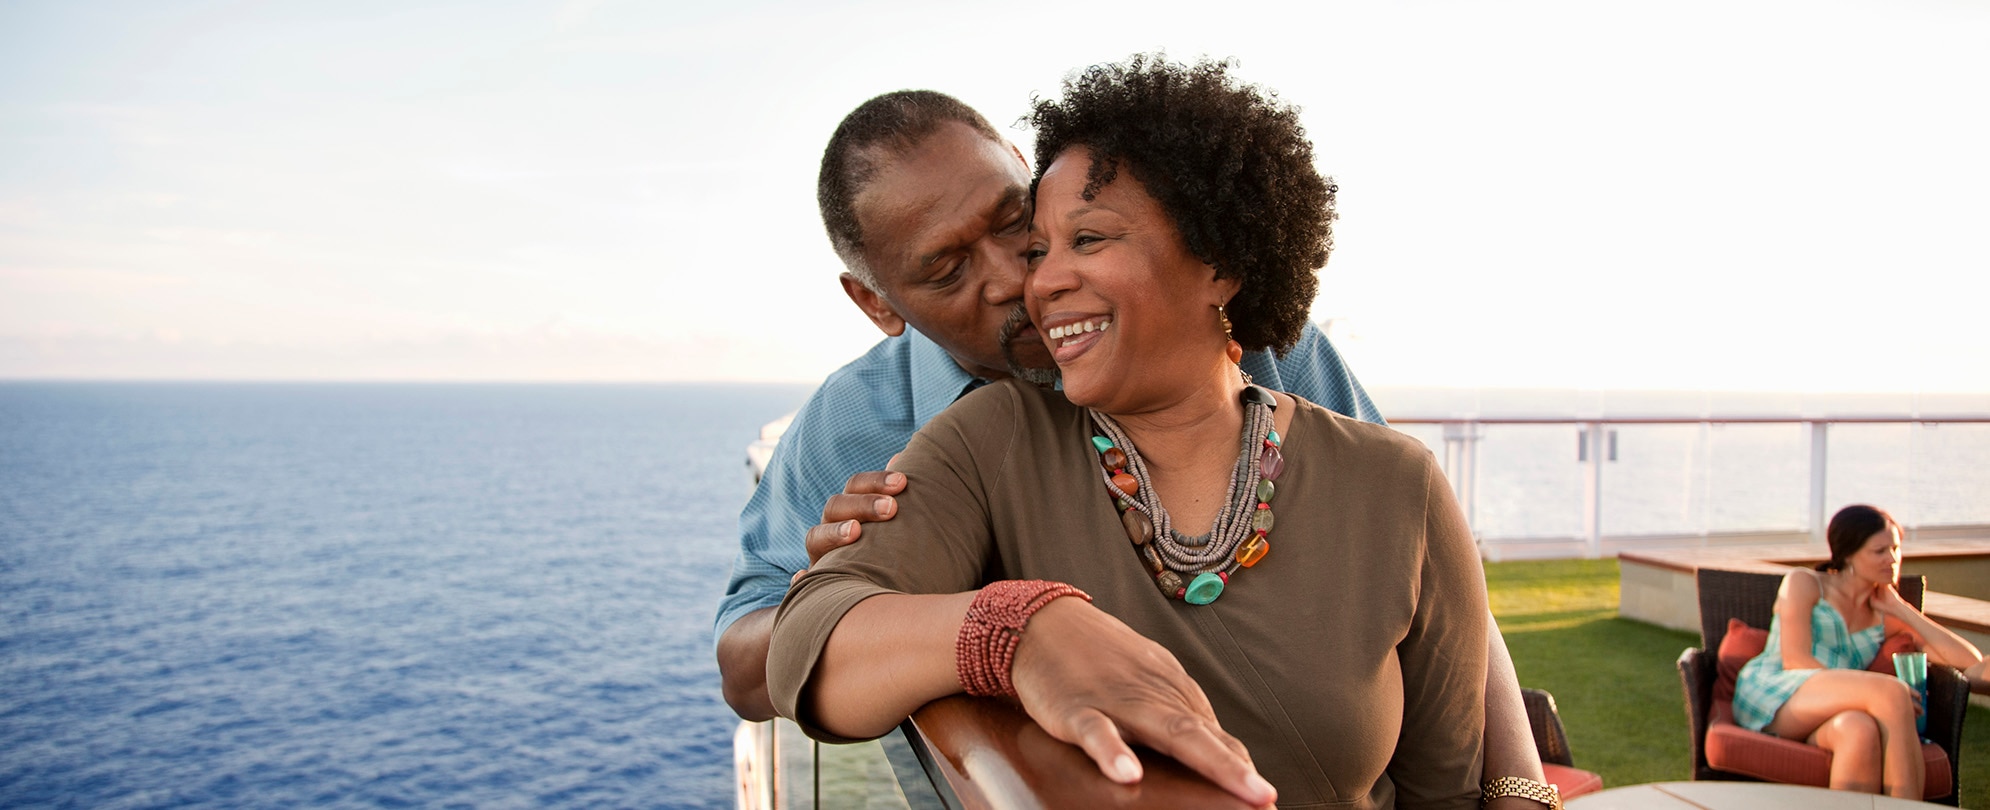 An older man kissing his wife's cheek while smiling on a deck overlooking the water.